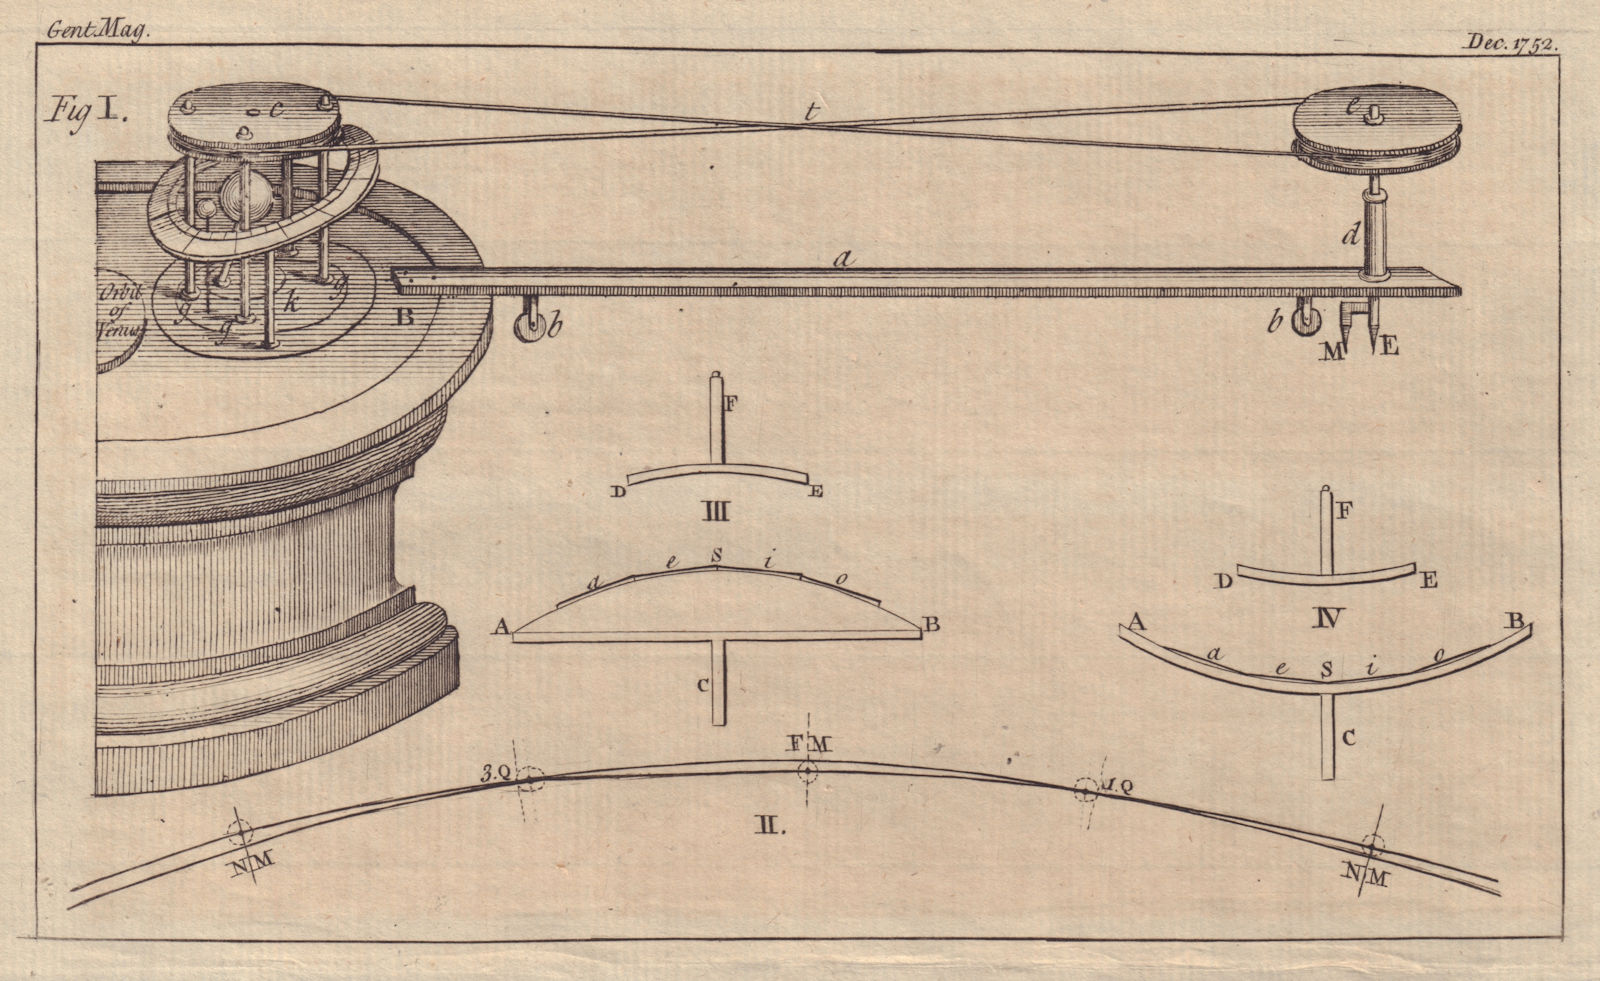 A new apparatus for an Orrery. Astronomy. Solar system. GENTS MAG 1752 print